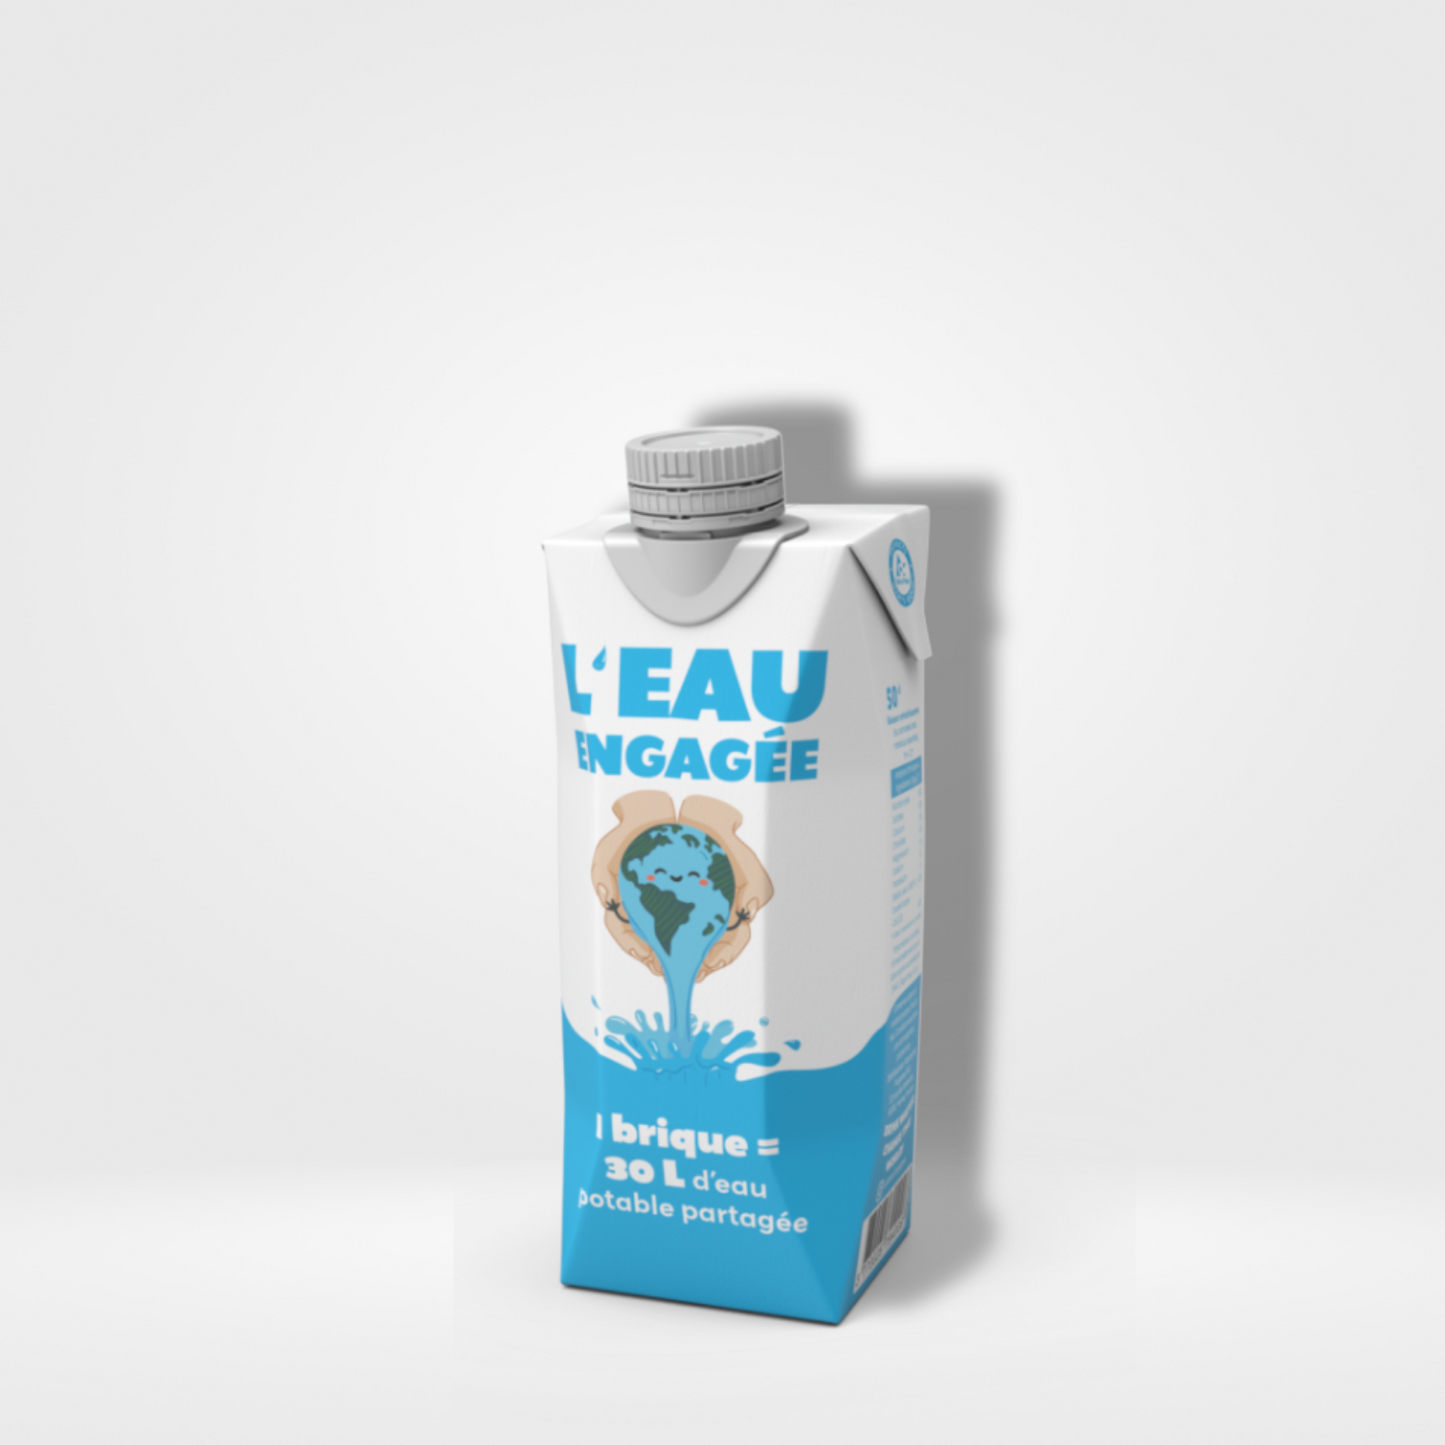 L'eau Engagée (ex Drink Water Share Water)